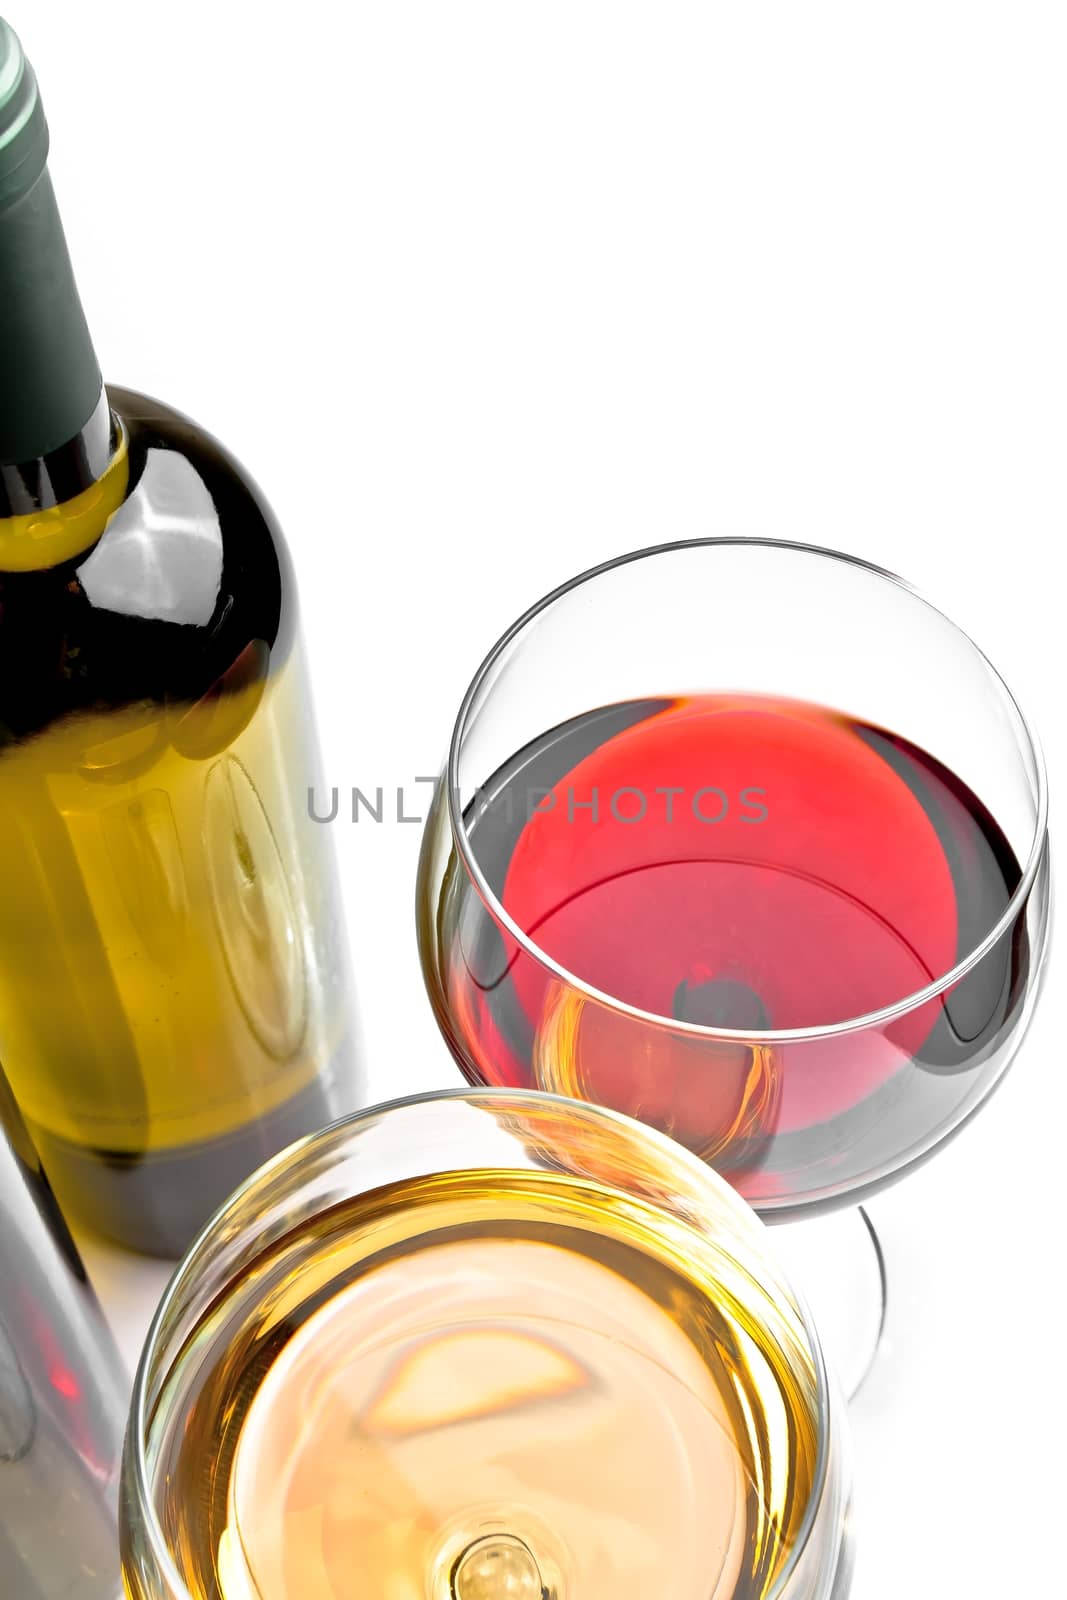 top of view of red and white wine glasses near wine bottle on white background